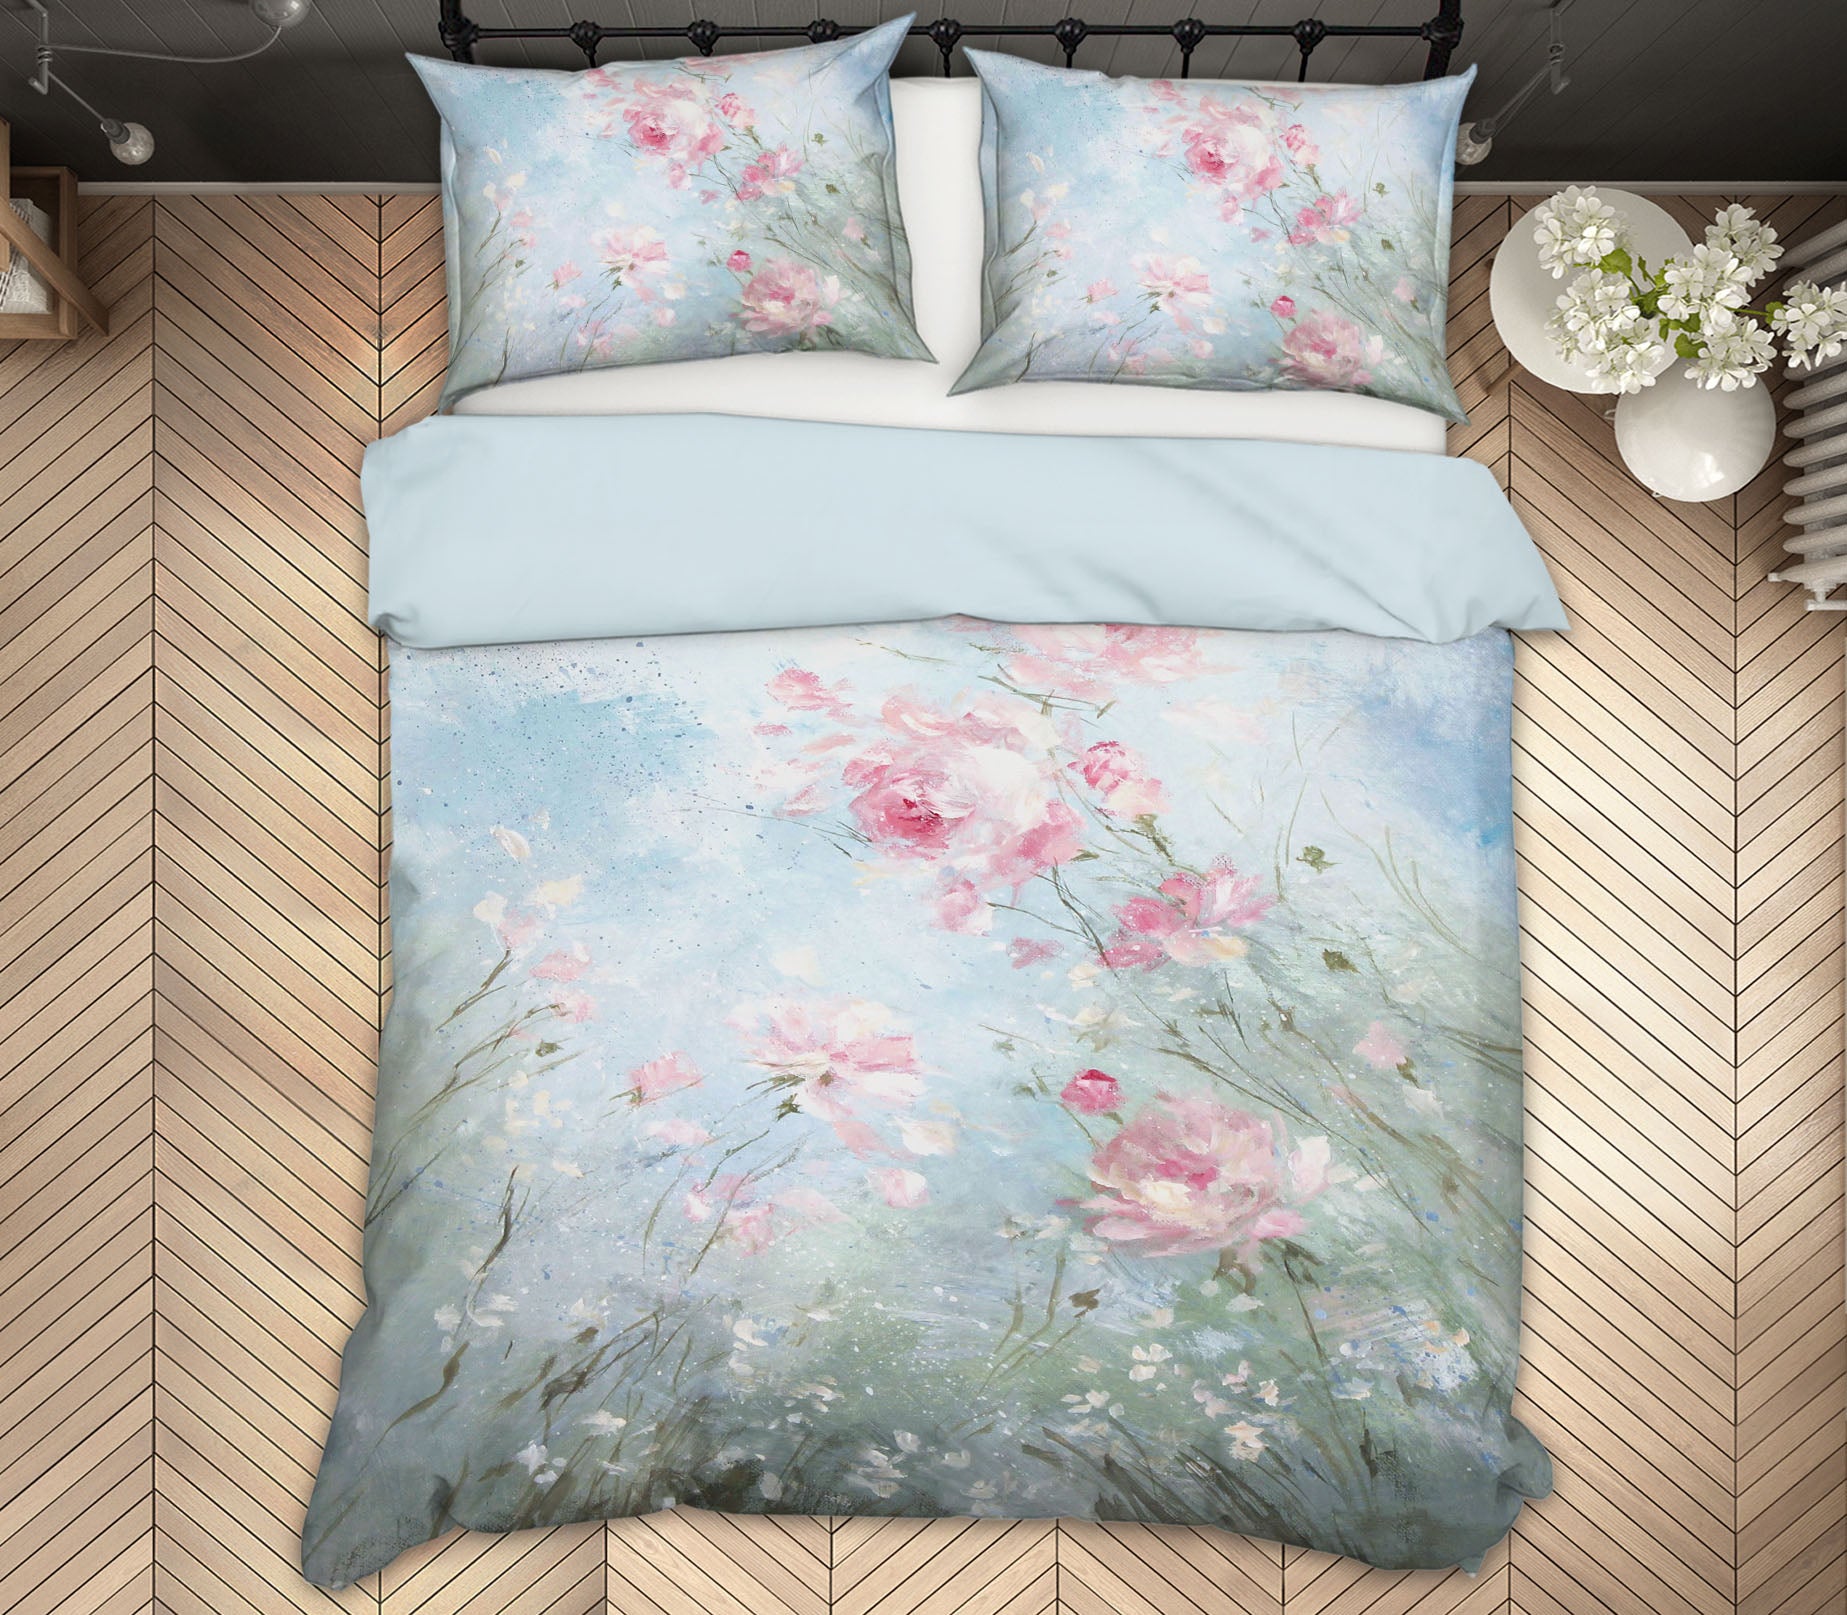 3D Pink Flowers 021 Debi Coules Bedding Bed Pillowcases Quilt